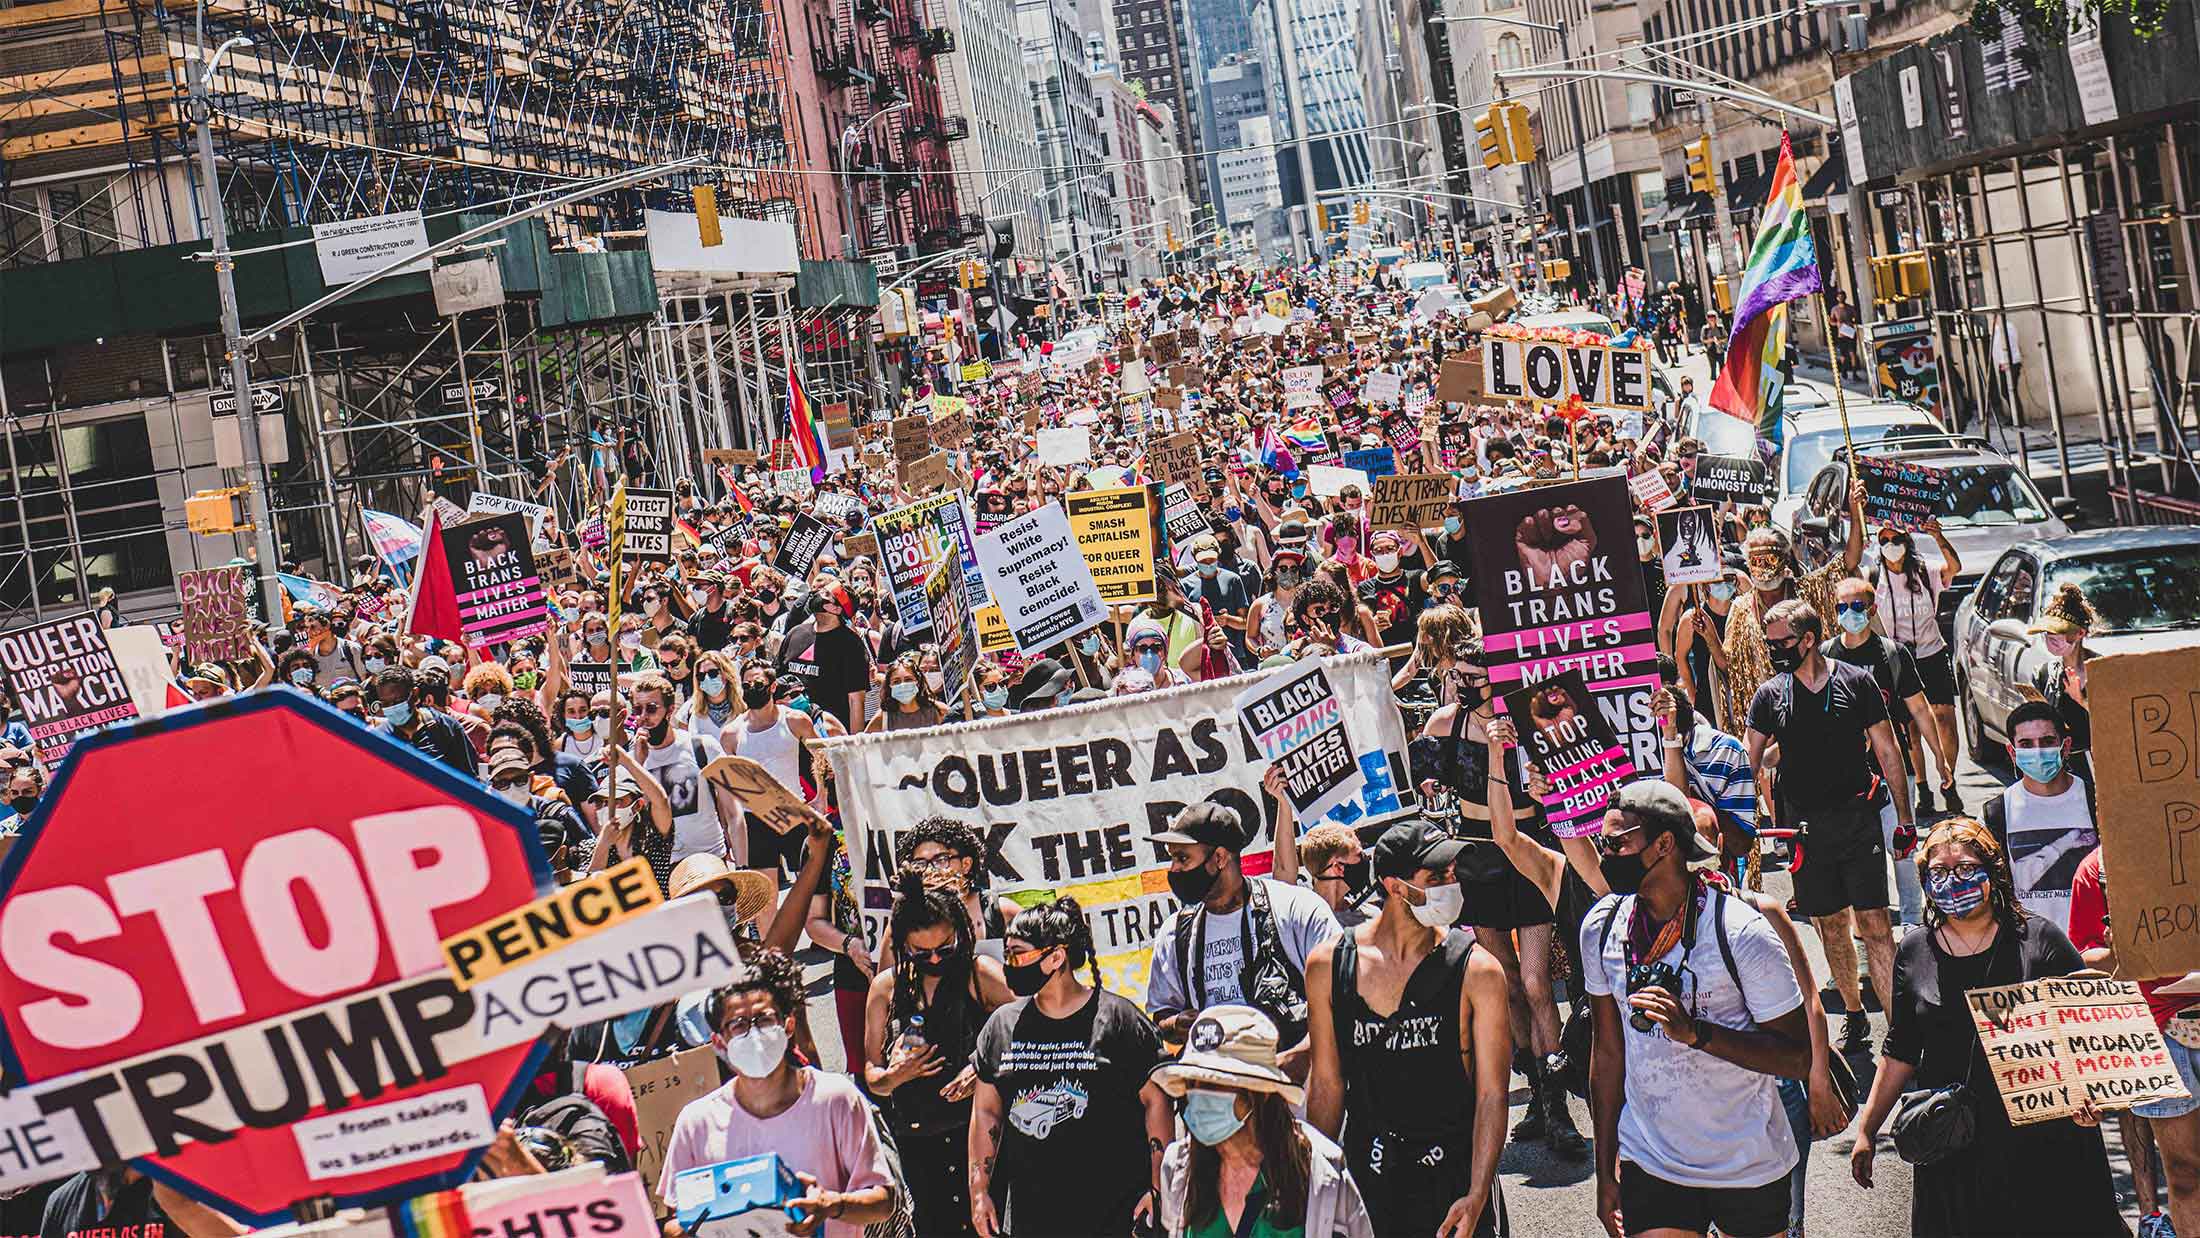 Crowds of people march down a city street holding various signs at the third annual queer liberation march in Bryant Park, NYC.